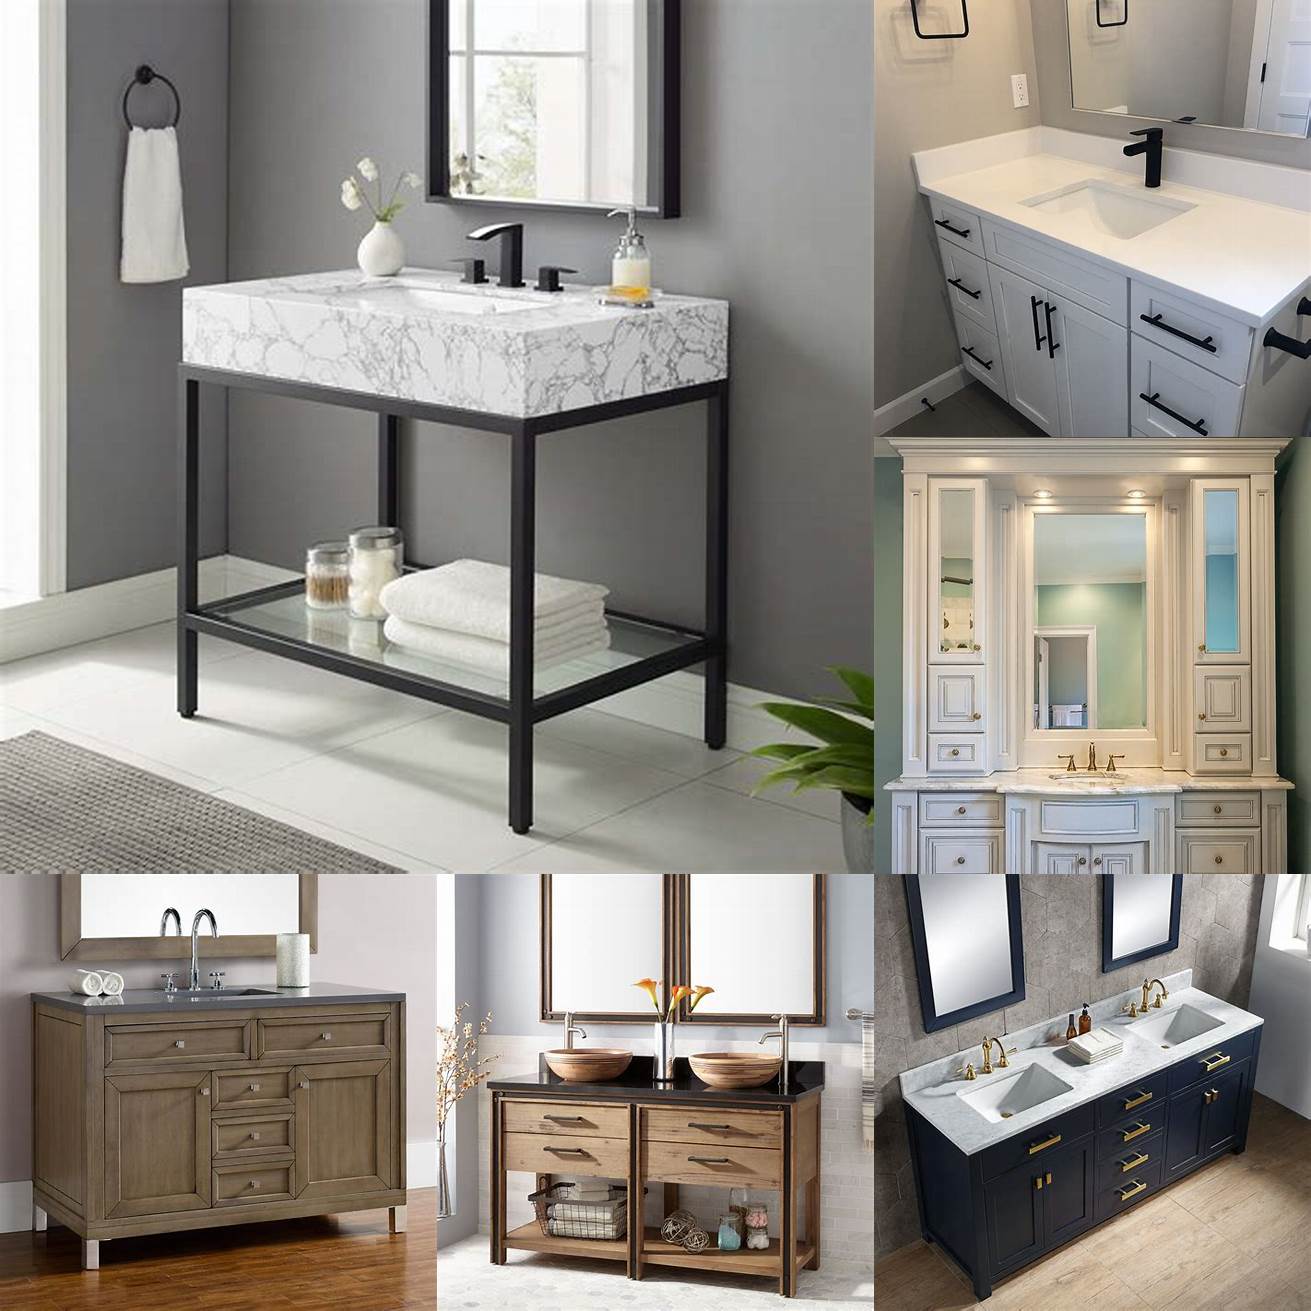 1 Cost Metal vanities can be more expensive than other materials such as wood or laminate